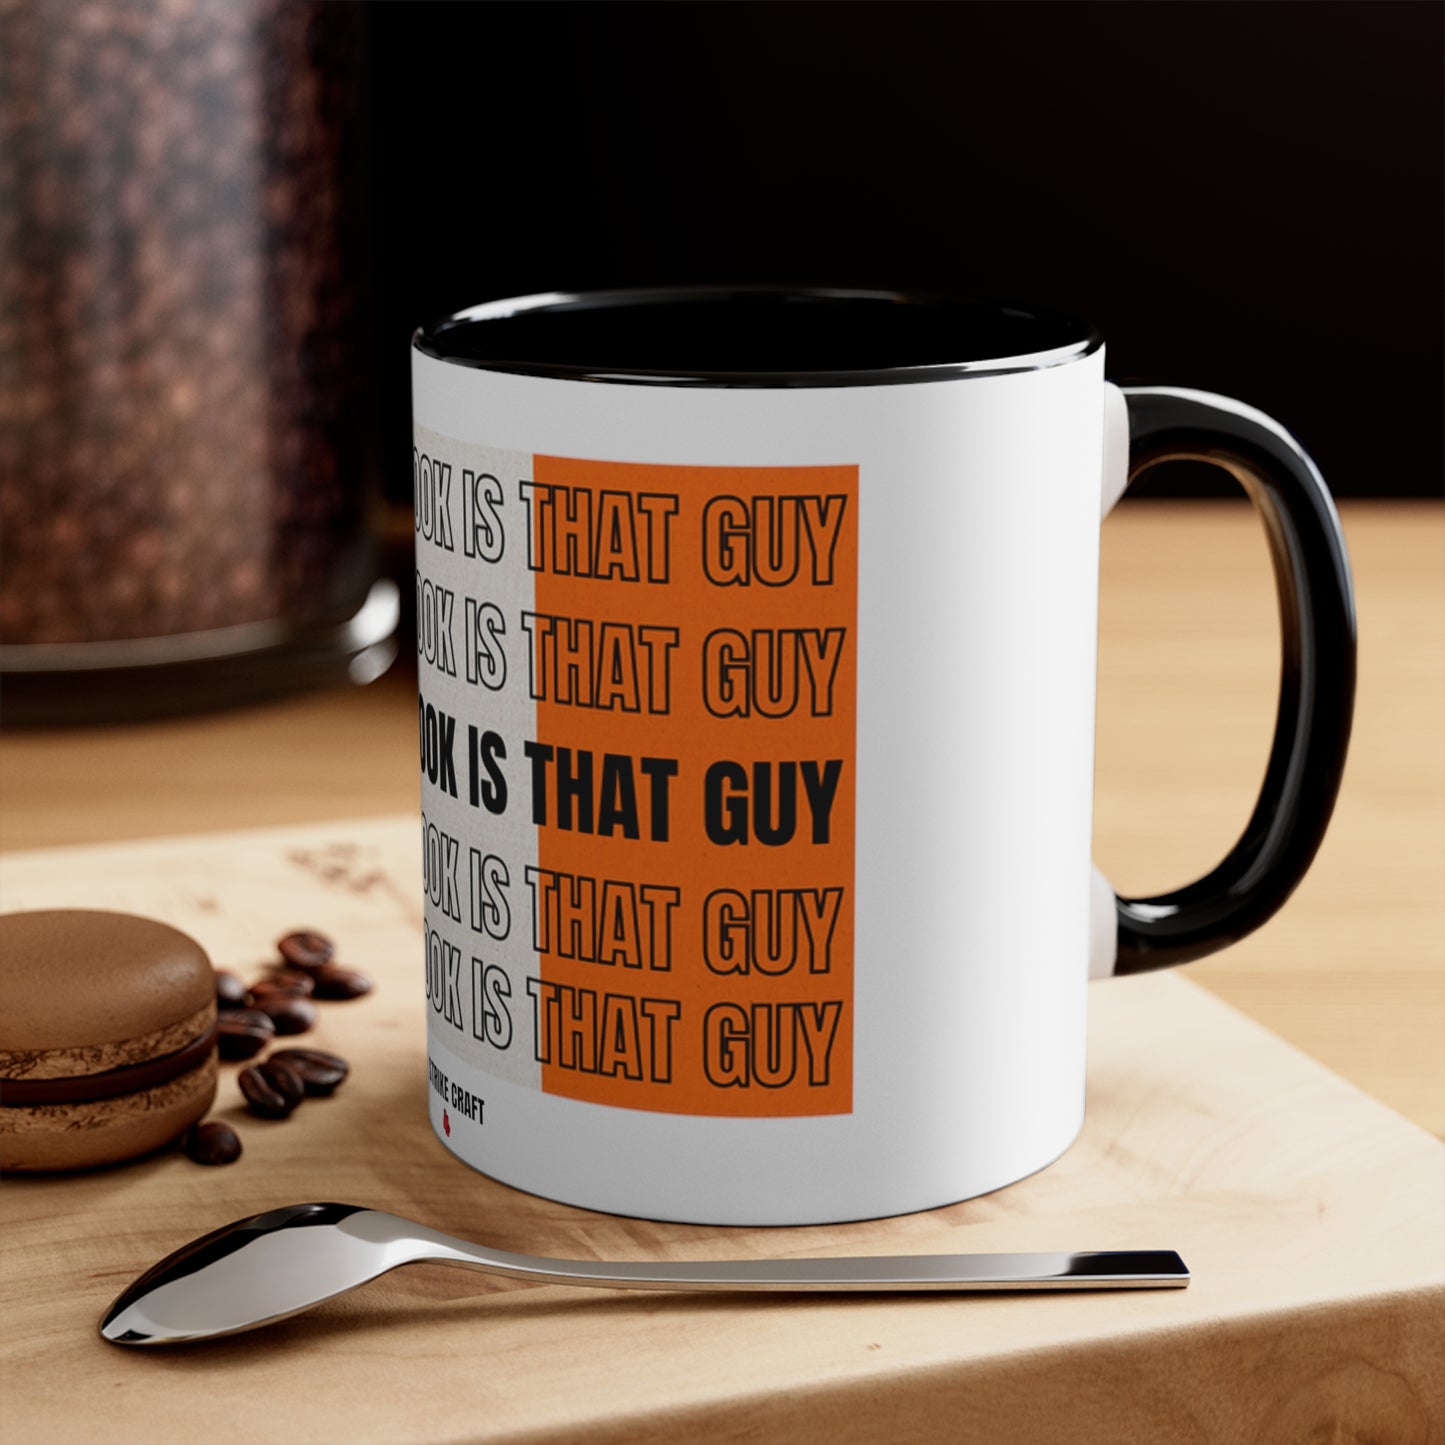 WHO THE FOOK IS THAT GUY mug, 11oz